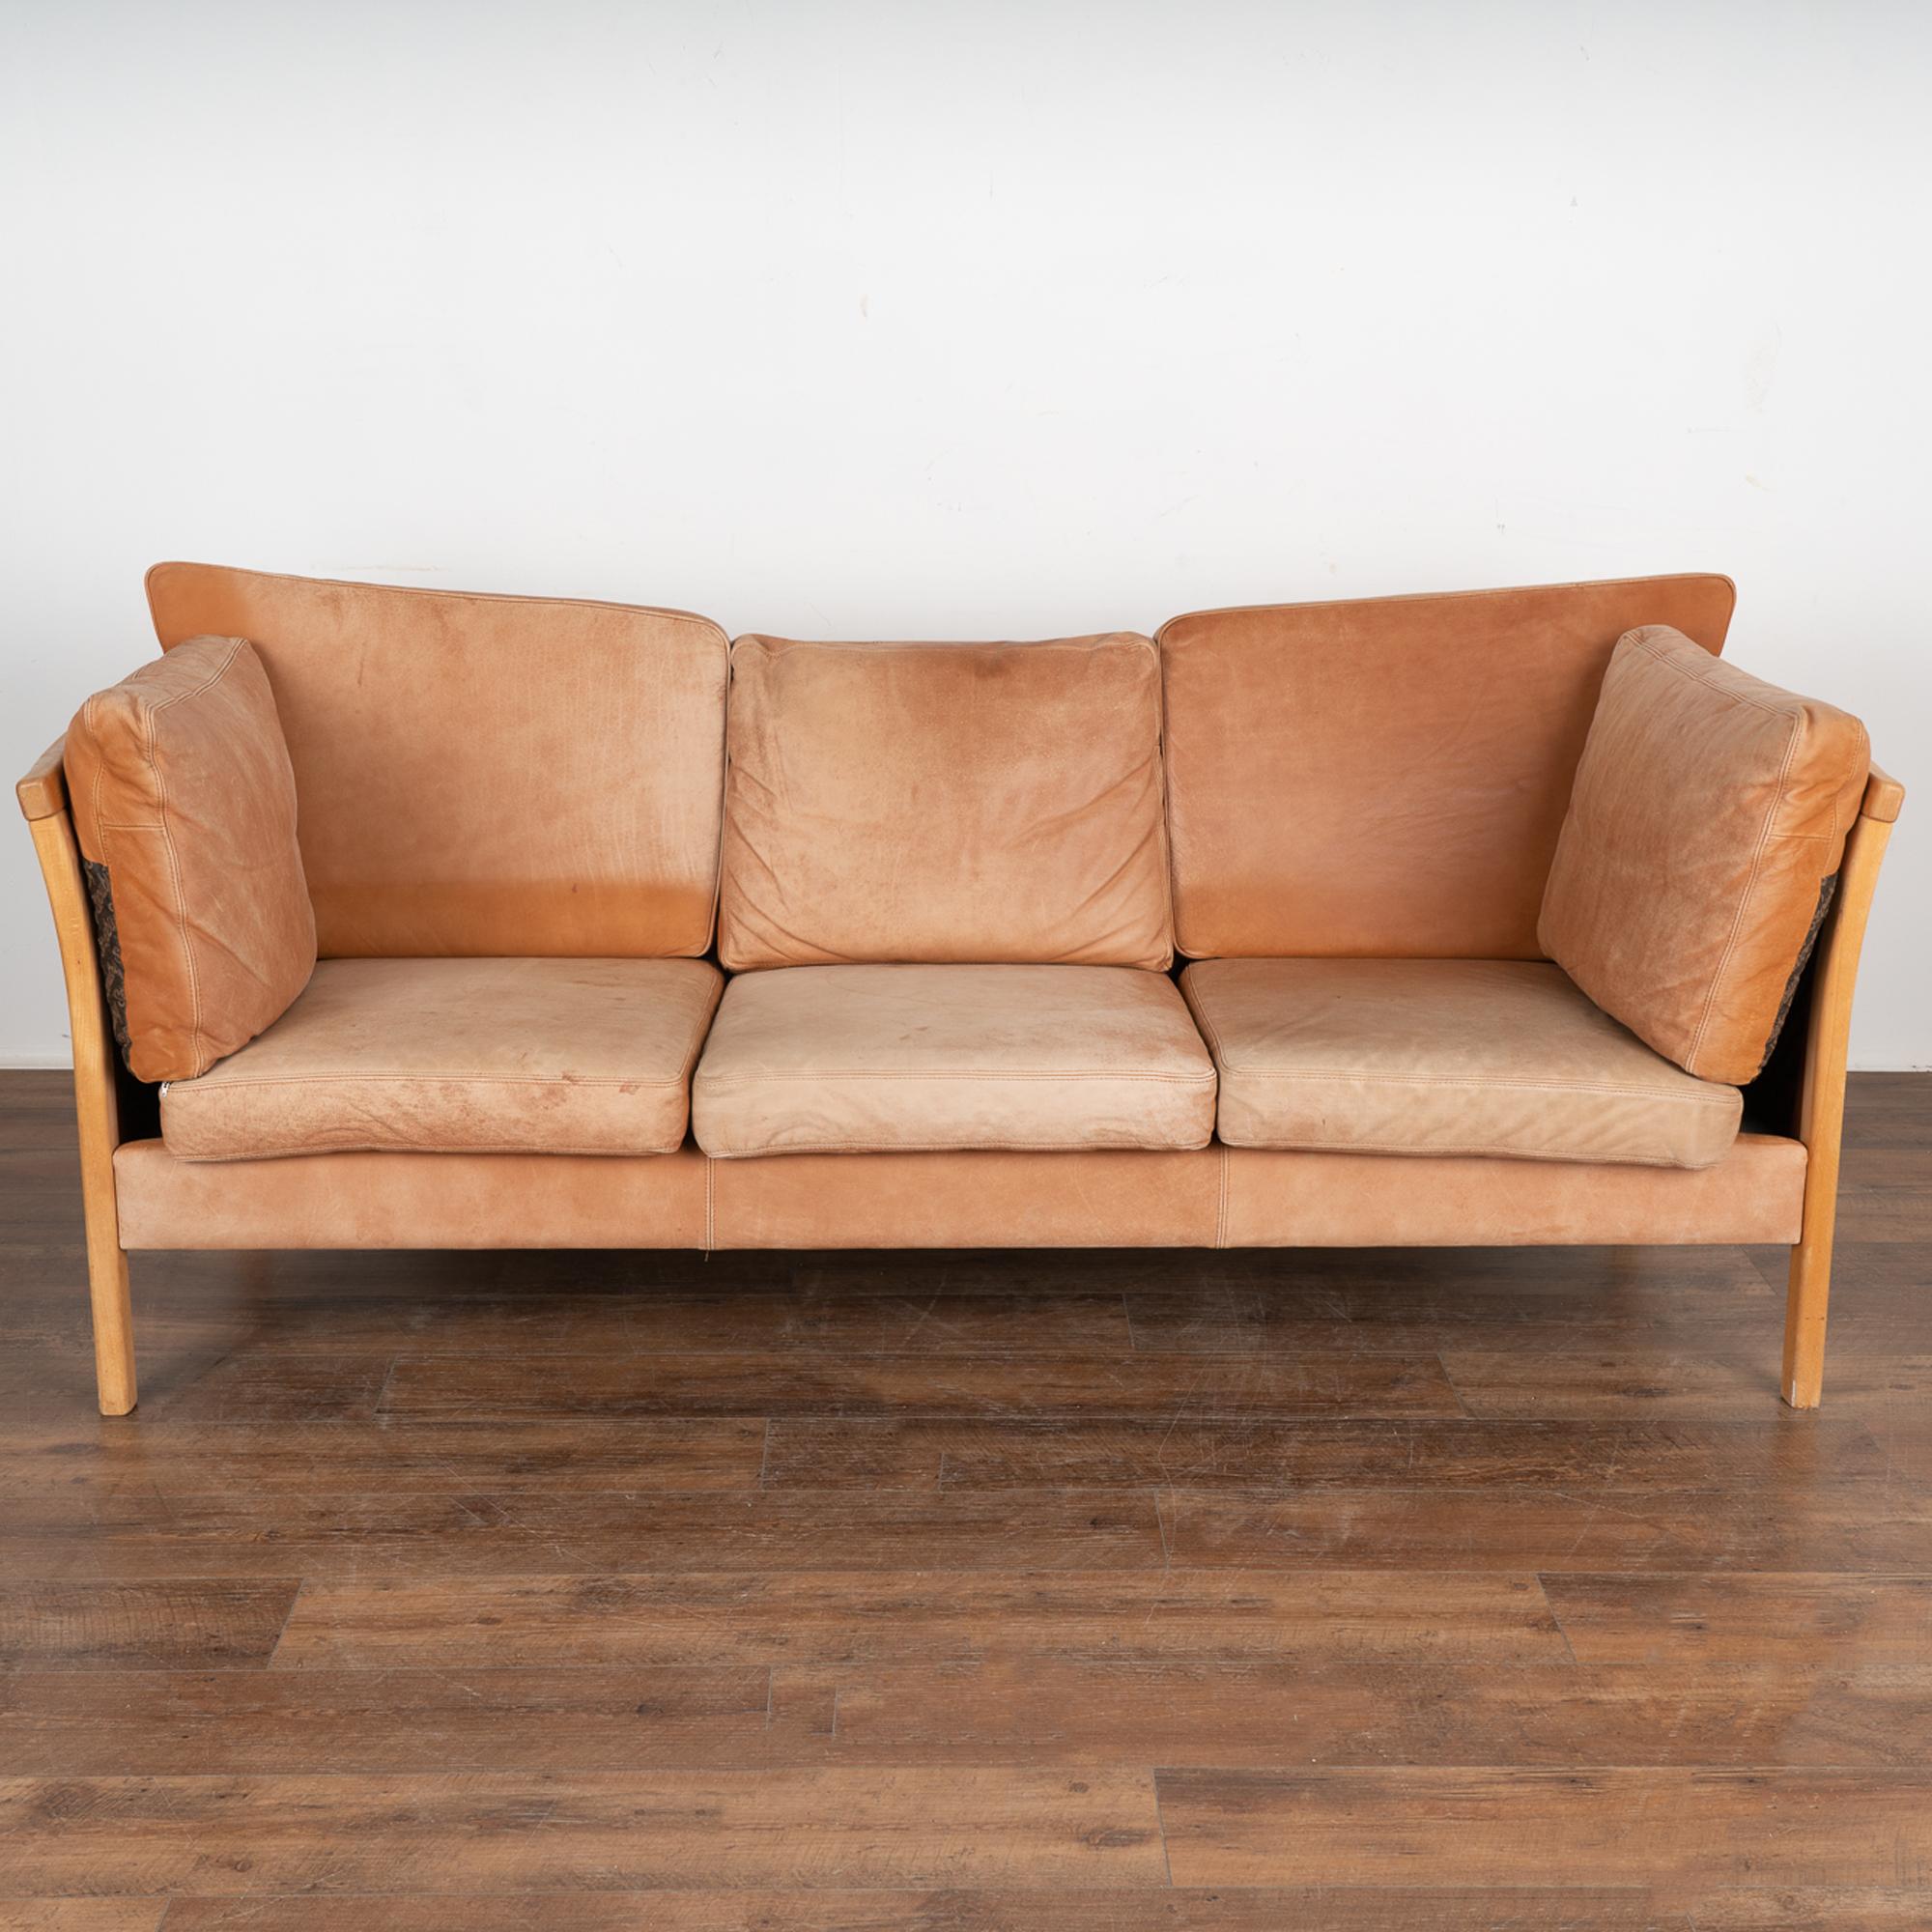 Danish Mid-Century Modern 3 Seat Vintage Leather Sofa by Stouby of Denmark, circa 1970 For Sale